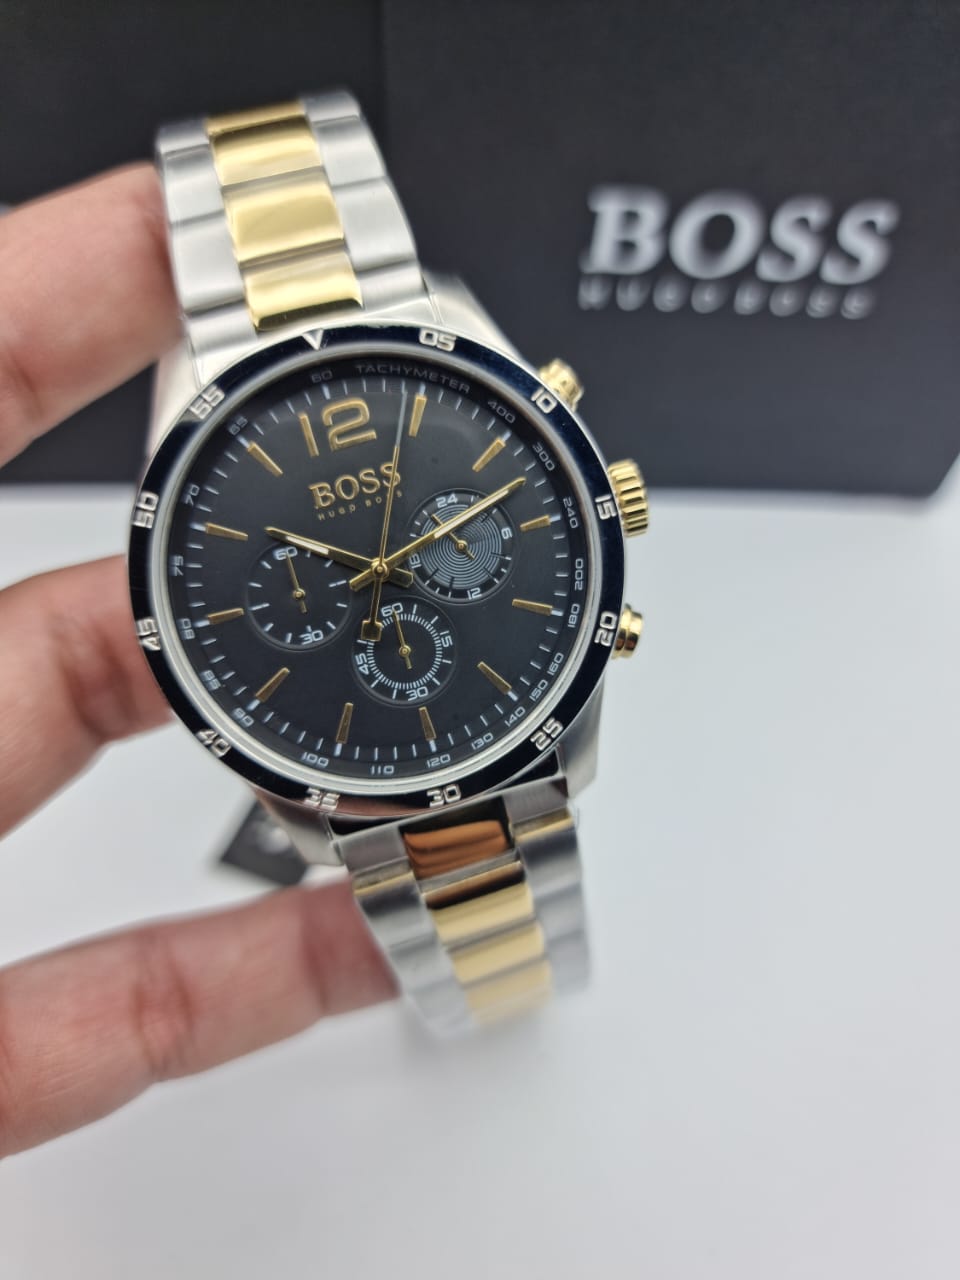 Hugo Boss Professional Two-Tone Stainless Steel Black Dial Chronograph Quartz Watch For Gents - Hugo Boss 1513529